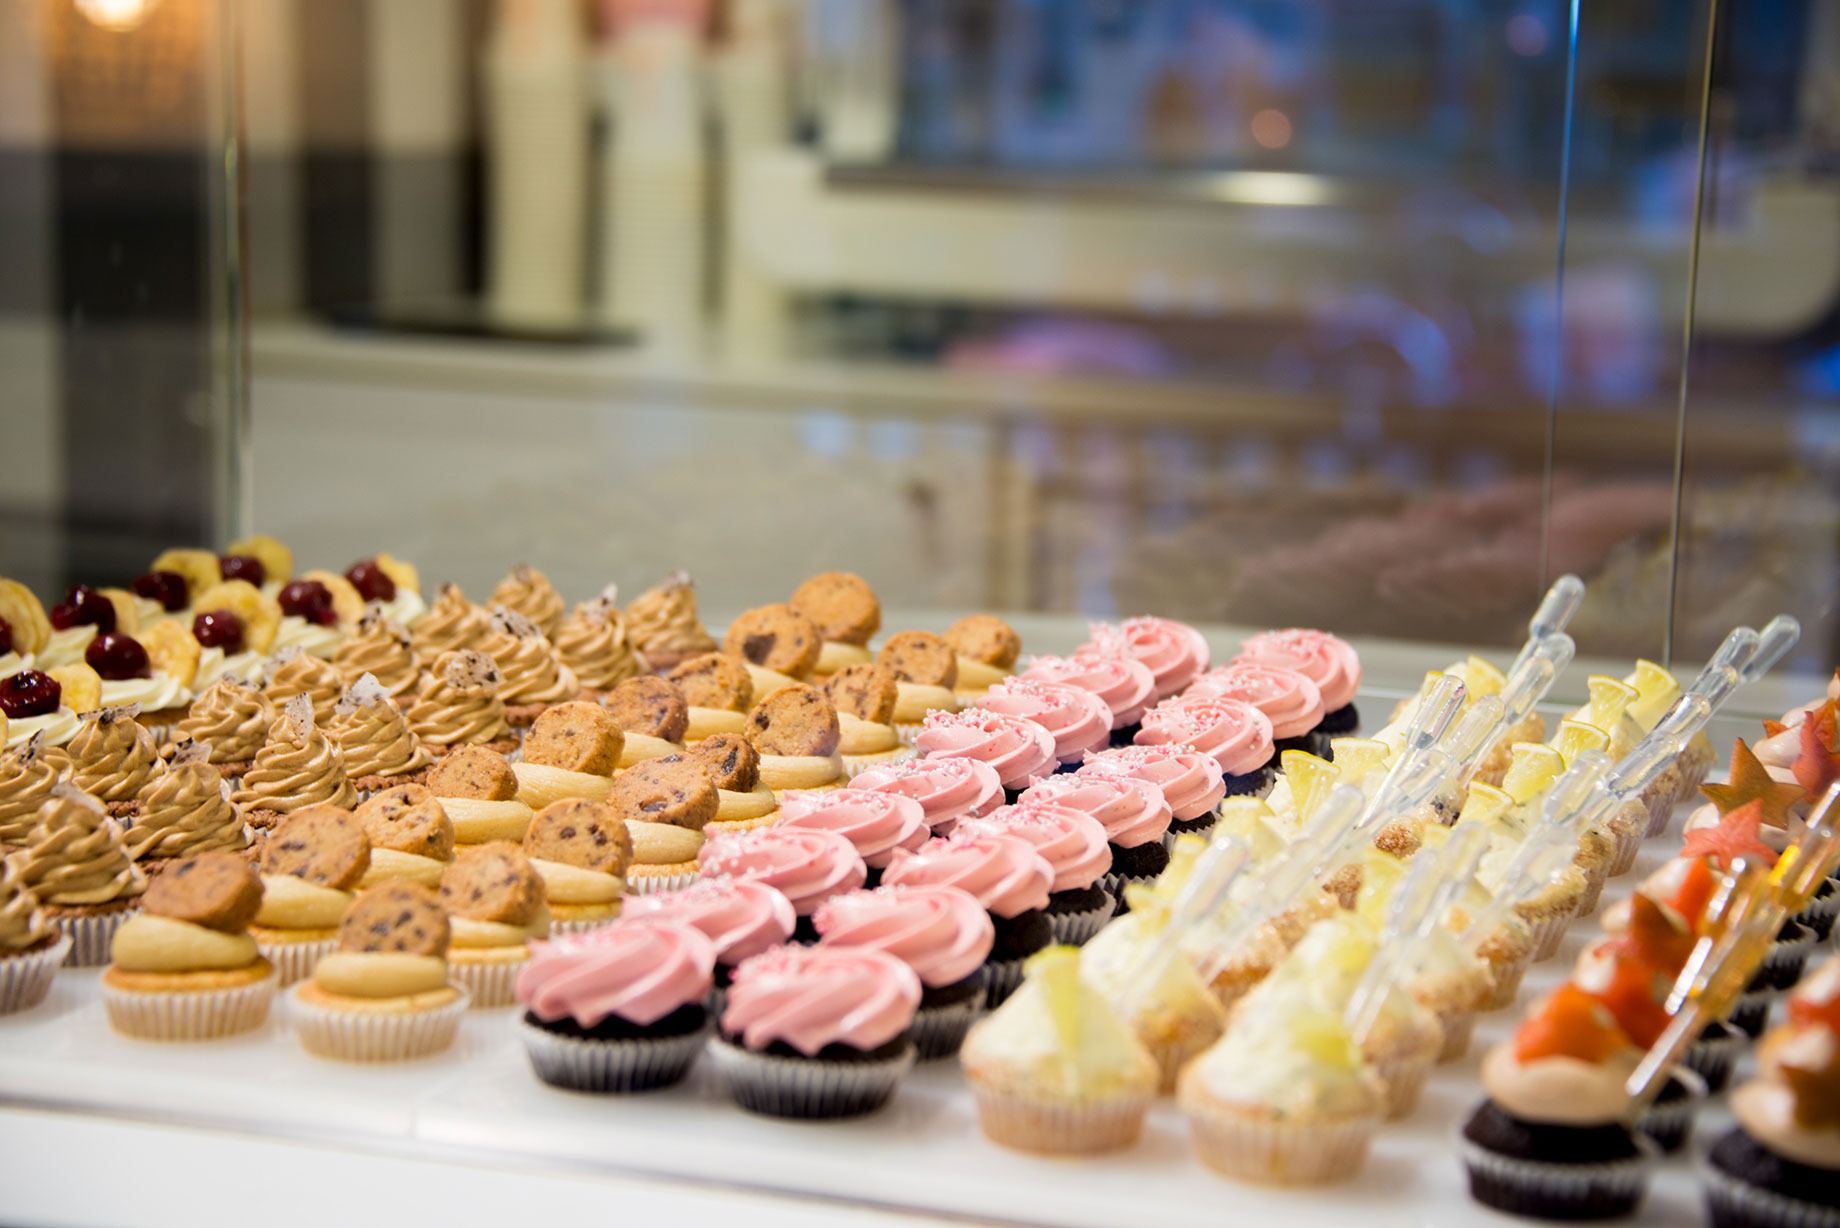 Which is the best cake shop in Chennai? - Quora